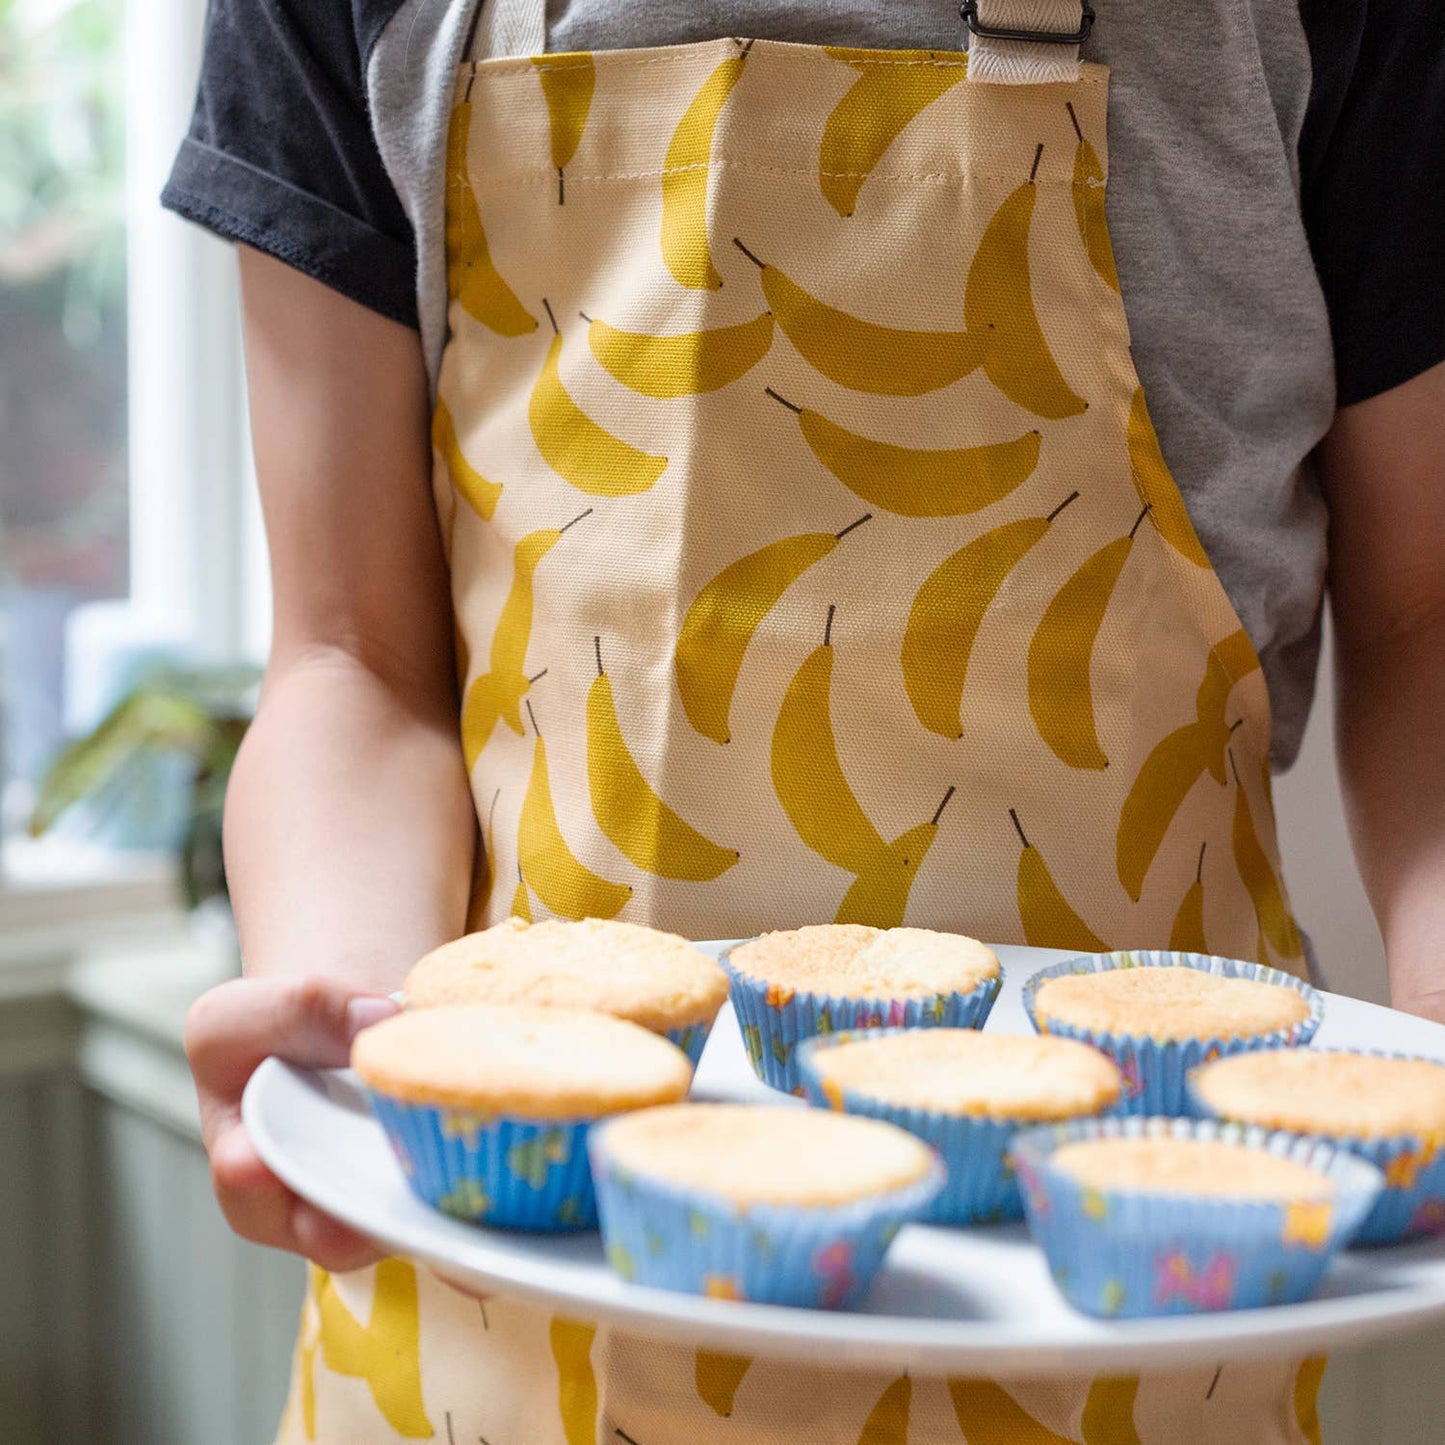 Children size apron with banana print all over